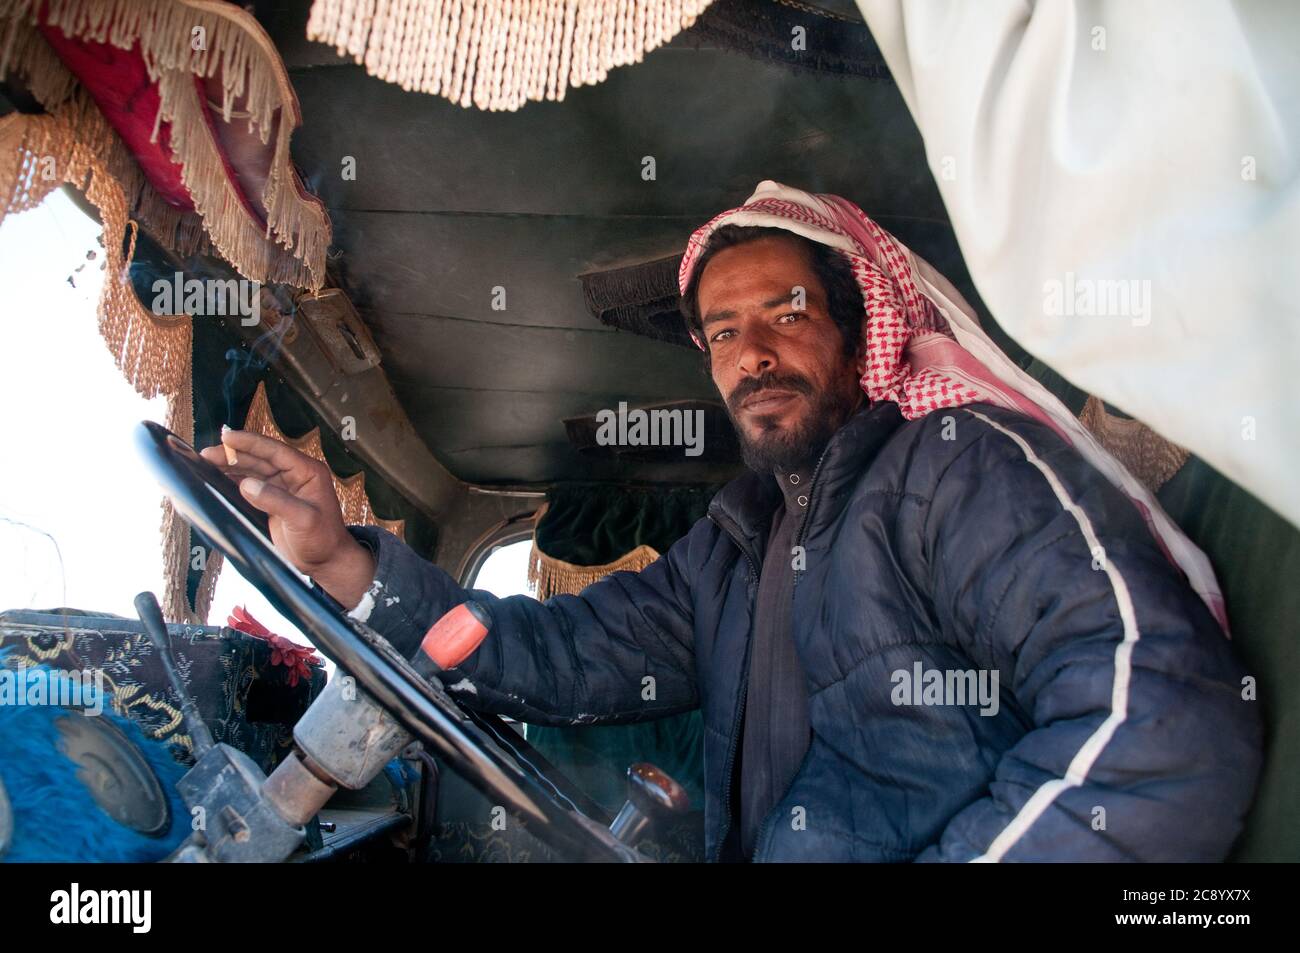 A young Bedouin man and truck driver sitting in his lorry near the town of Azraq, in the Badia region of the Eastern Desert of Jordan. Stock Photo